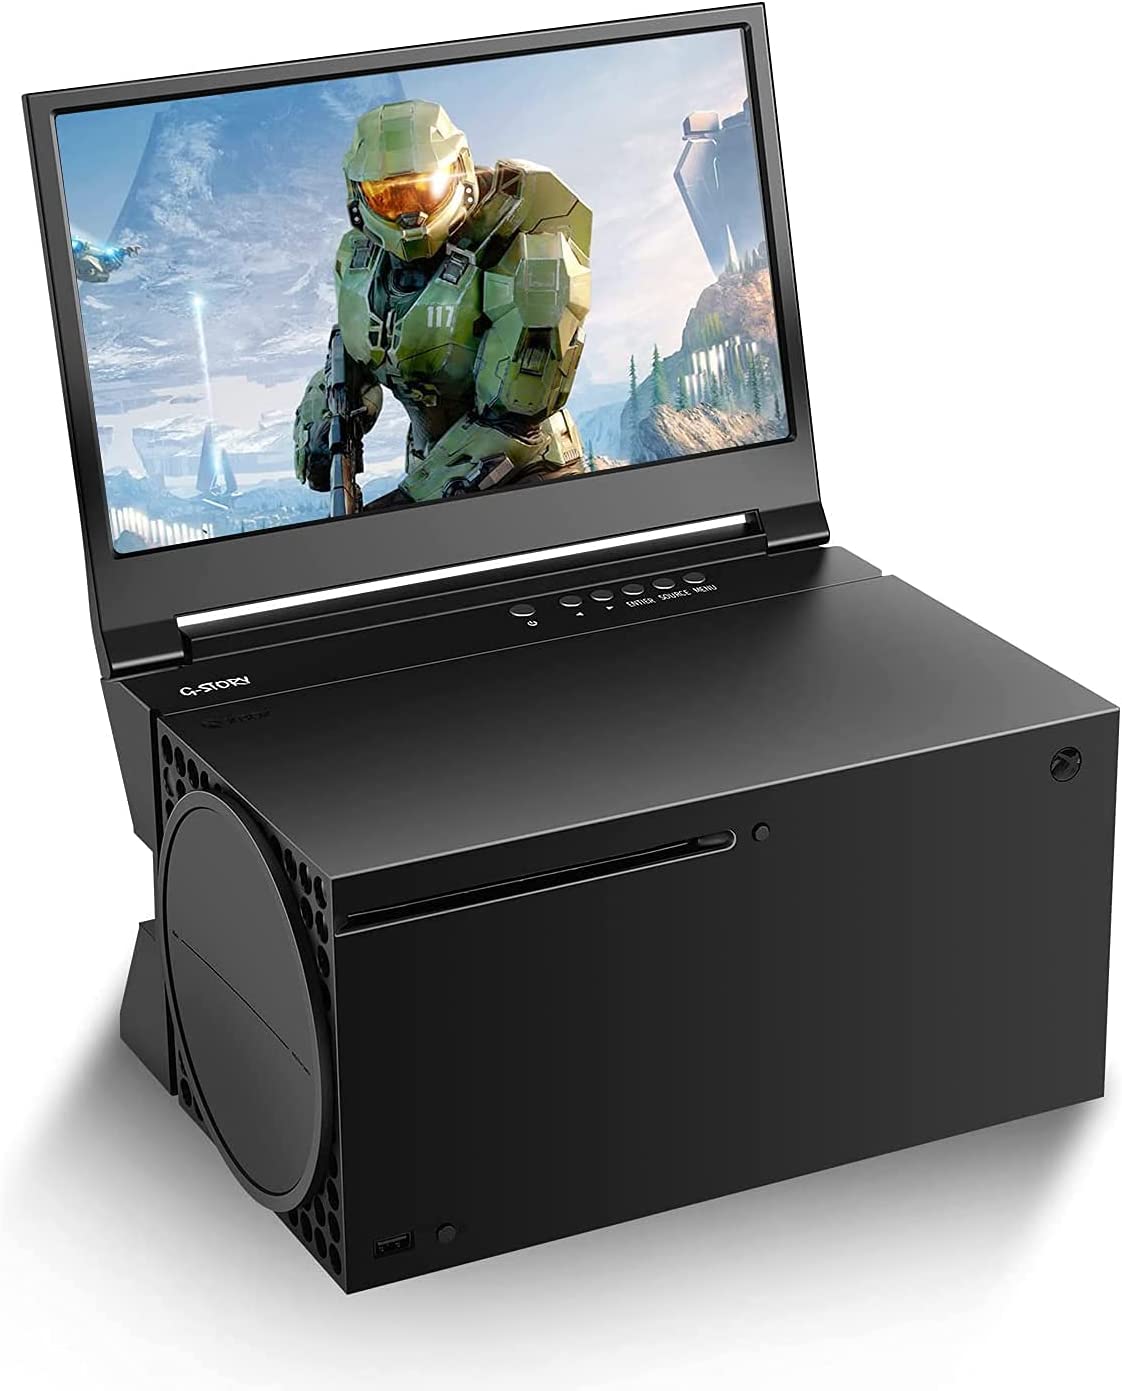  G-STORY 12.5'' Portable Monitor, 1080P Gaming Monitor IPS  Screen for Xbox Series S（not Included） with Two HDMI, HDR, Freesync, Game  Mode, Travel Monitor for Xbox Series S : Electronics